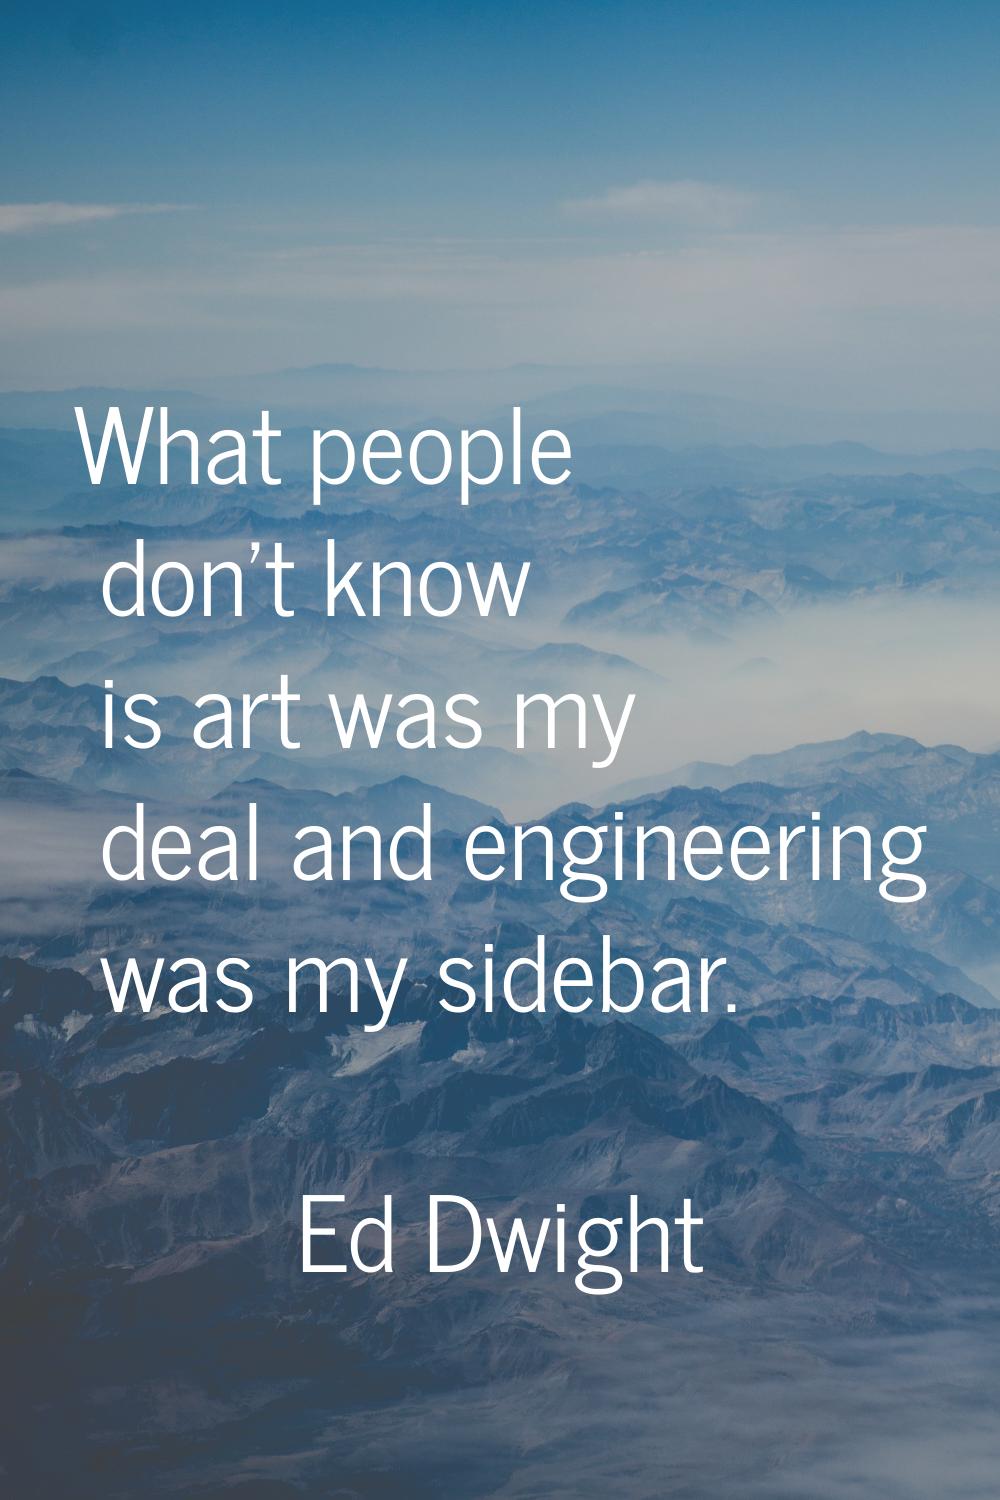 What people don't know is art was my deal and engineering was my sidebar.